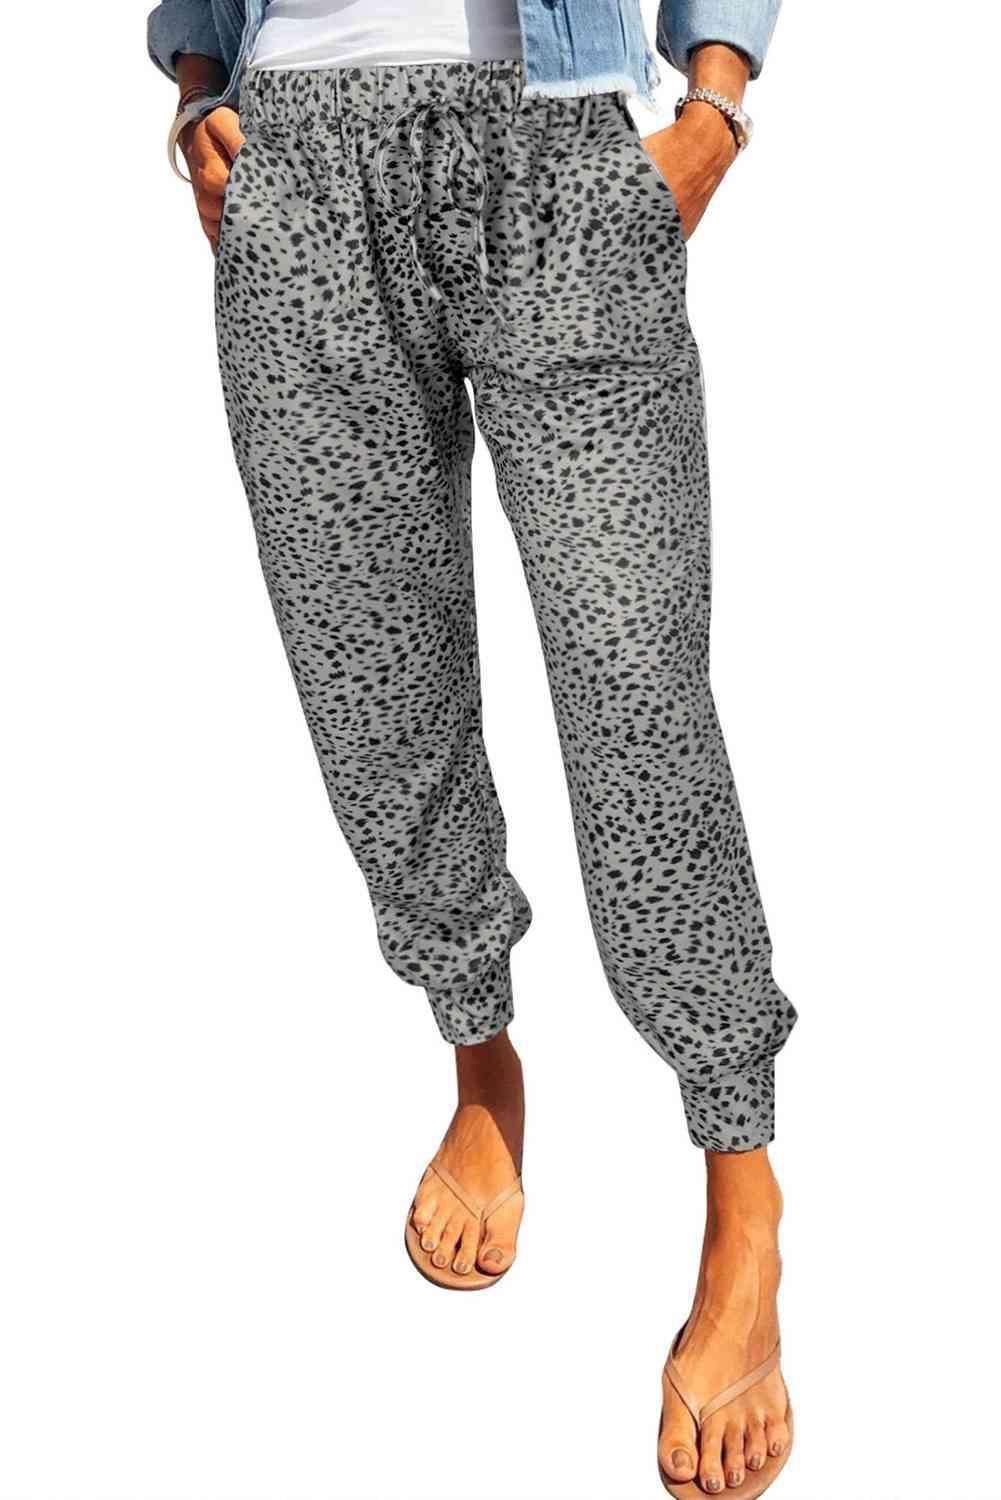 Chill Out Pocketed Jogger Leopard Print Pants - MXSTUDIO.COM